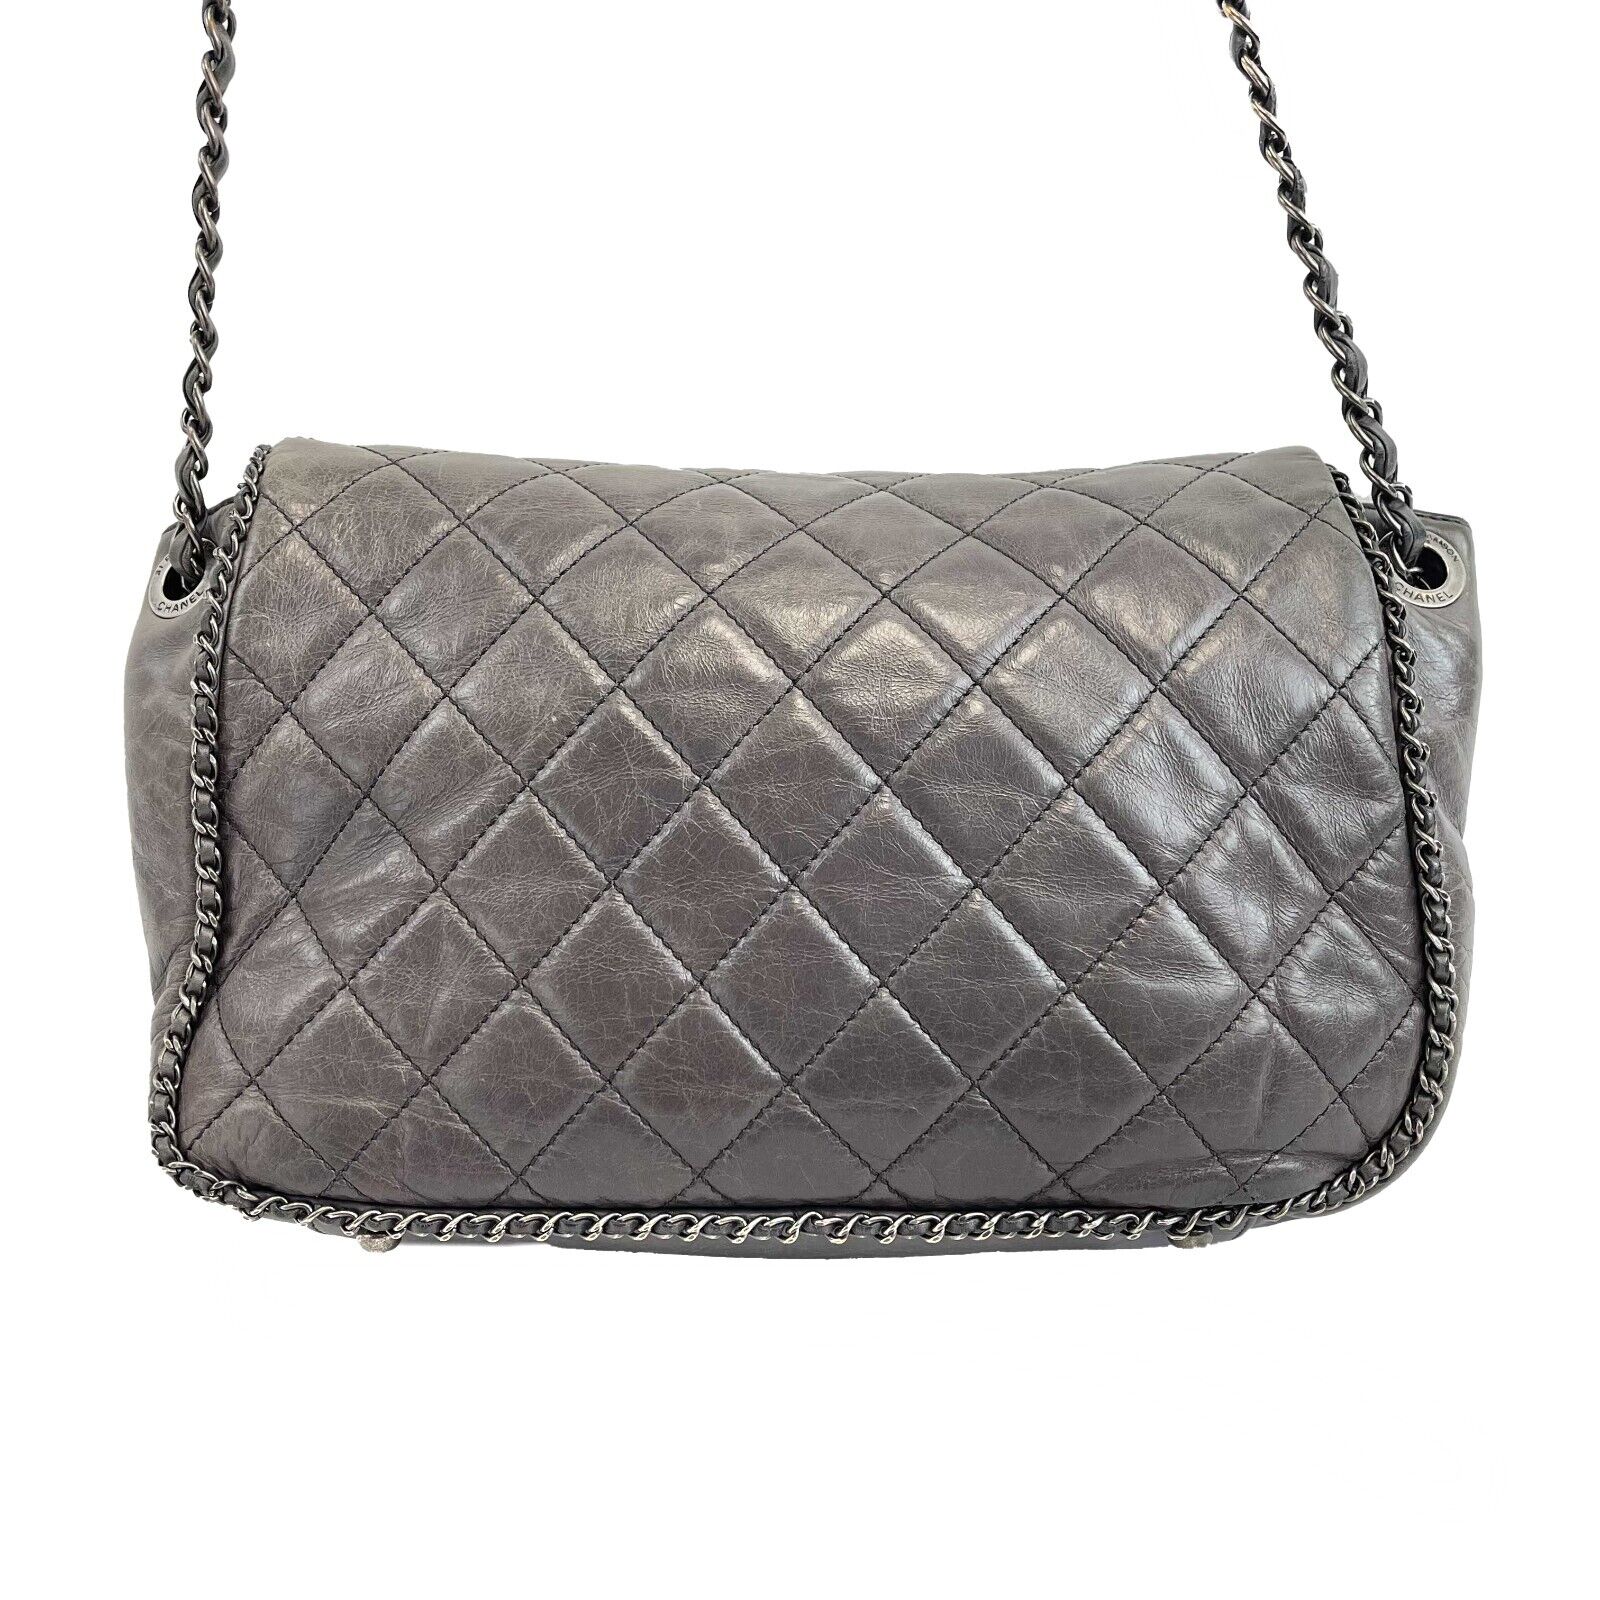 Chanel - Calfskin Quilted Large CC Enchained Accordion - Gray Shoulder Bag